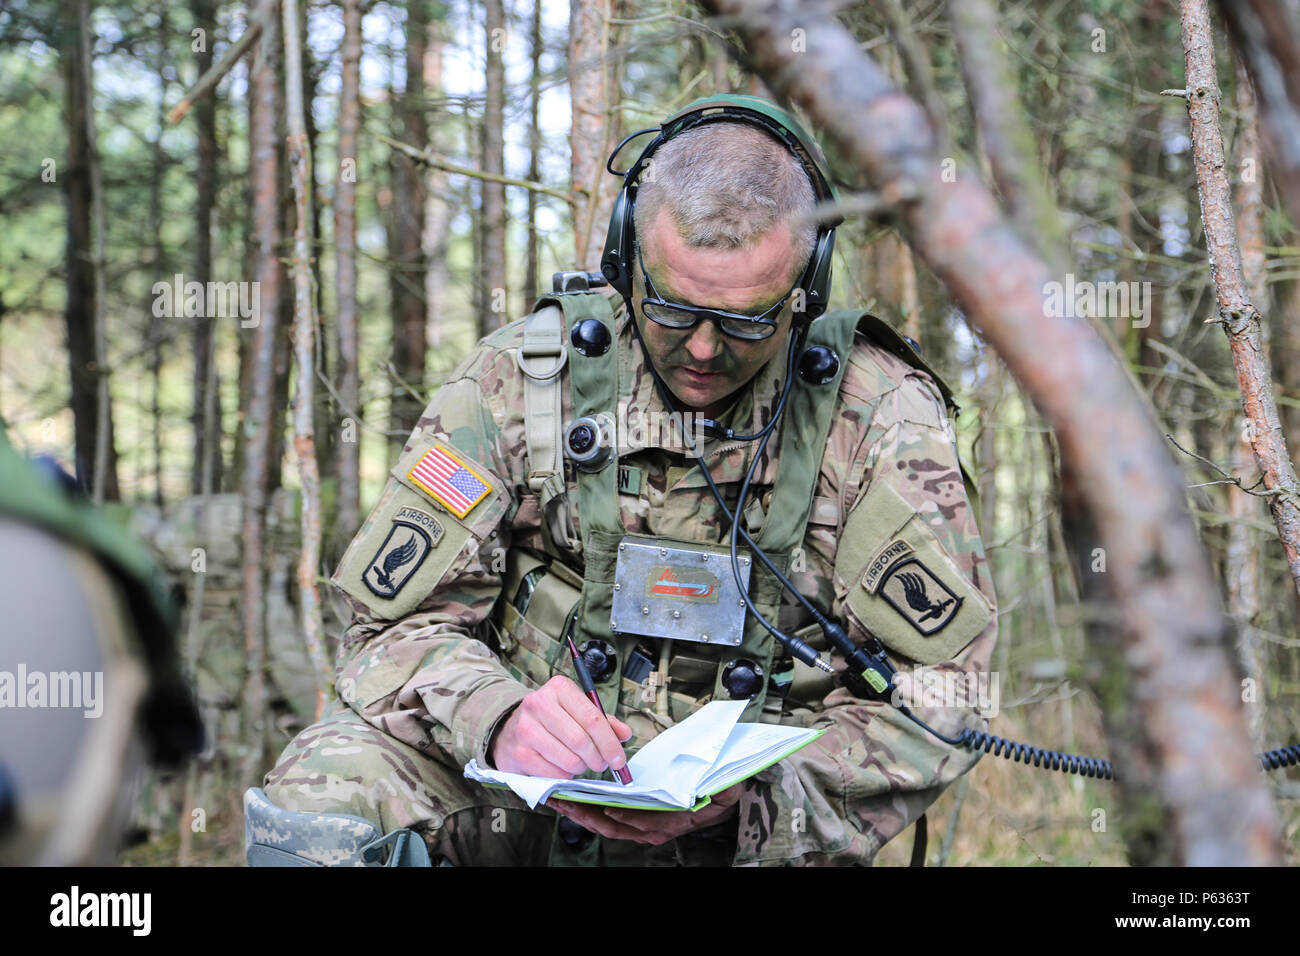 A U.S. Soldier of the 173rd Airborne Brigade writes corrects coordinates while conducting a pre-missions brief during exercise Saber Junction 16 at the U.S. Army’s Joint Multinational Readiness Center (JMRC) in Hohenfels, Germany, April 13, 2016. Saber Junction 16 is the U.S. Army Europe’s 173rd Airborne Brigade’s combat training center certification exercise, taking place at the JMRC in Hohenfels, Germany, Mar. 31-Apr. 24, 2016.  The exercise is designed to evaluate the readiness of the Army’s Europe-based combat brigades to conduct unified land operations and promote interoperability in a jo Stock Photo